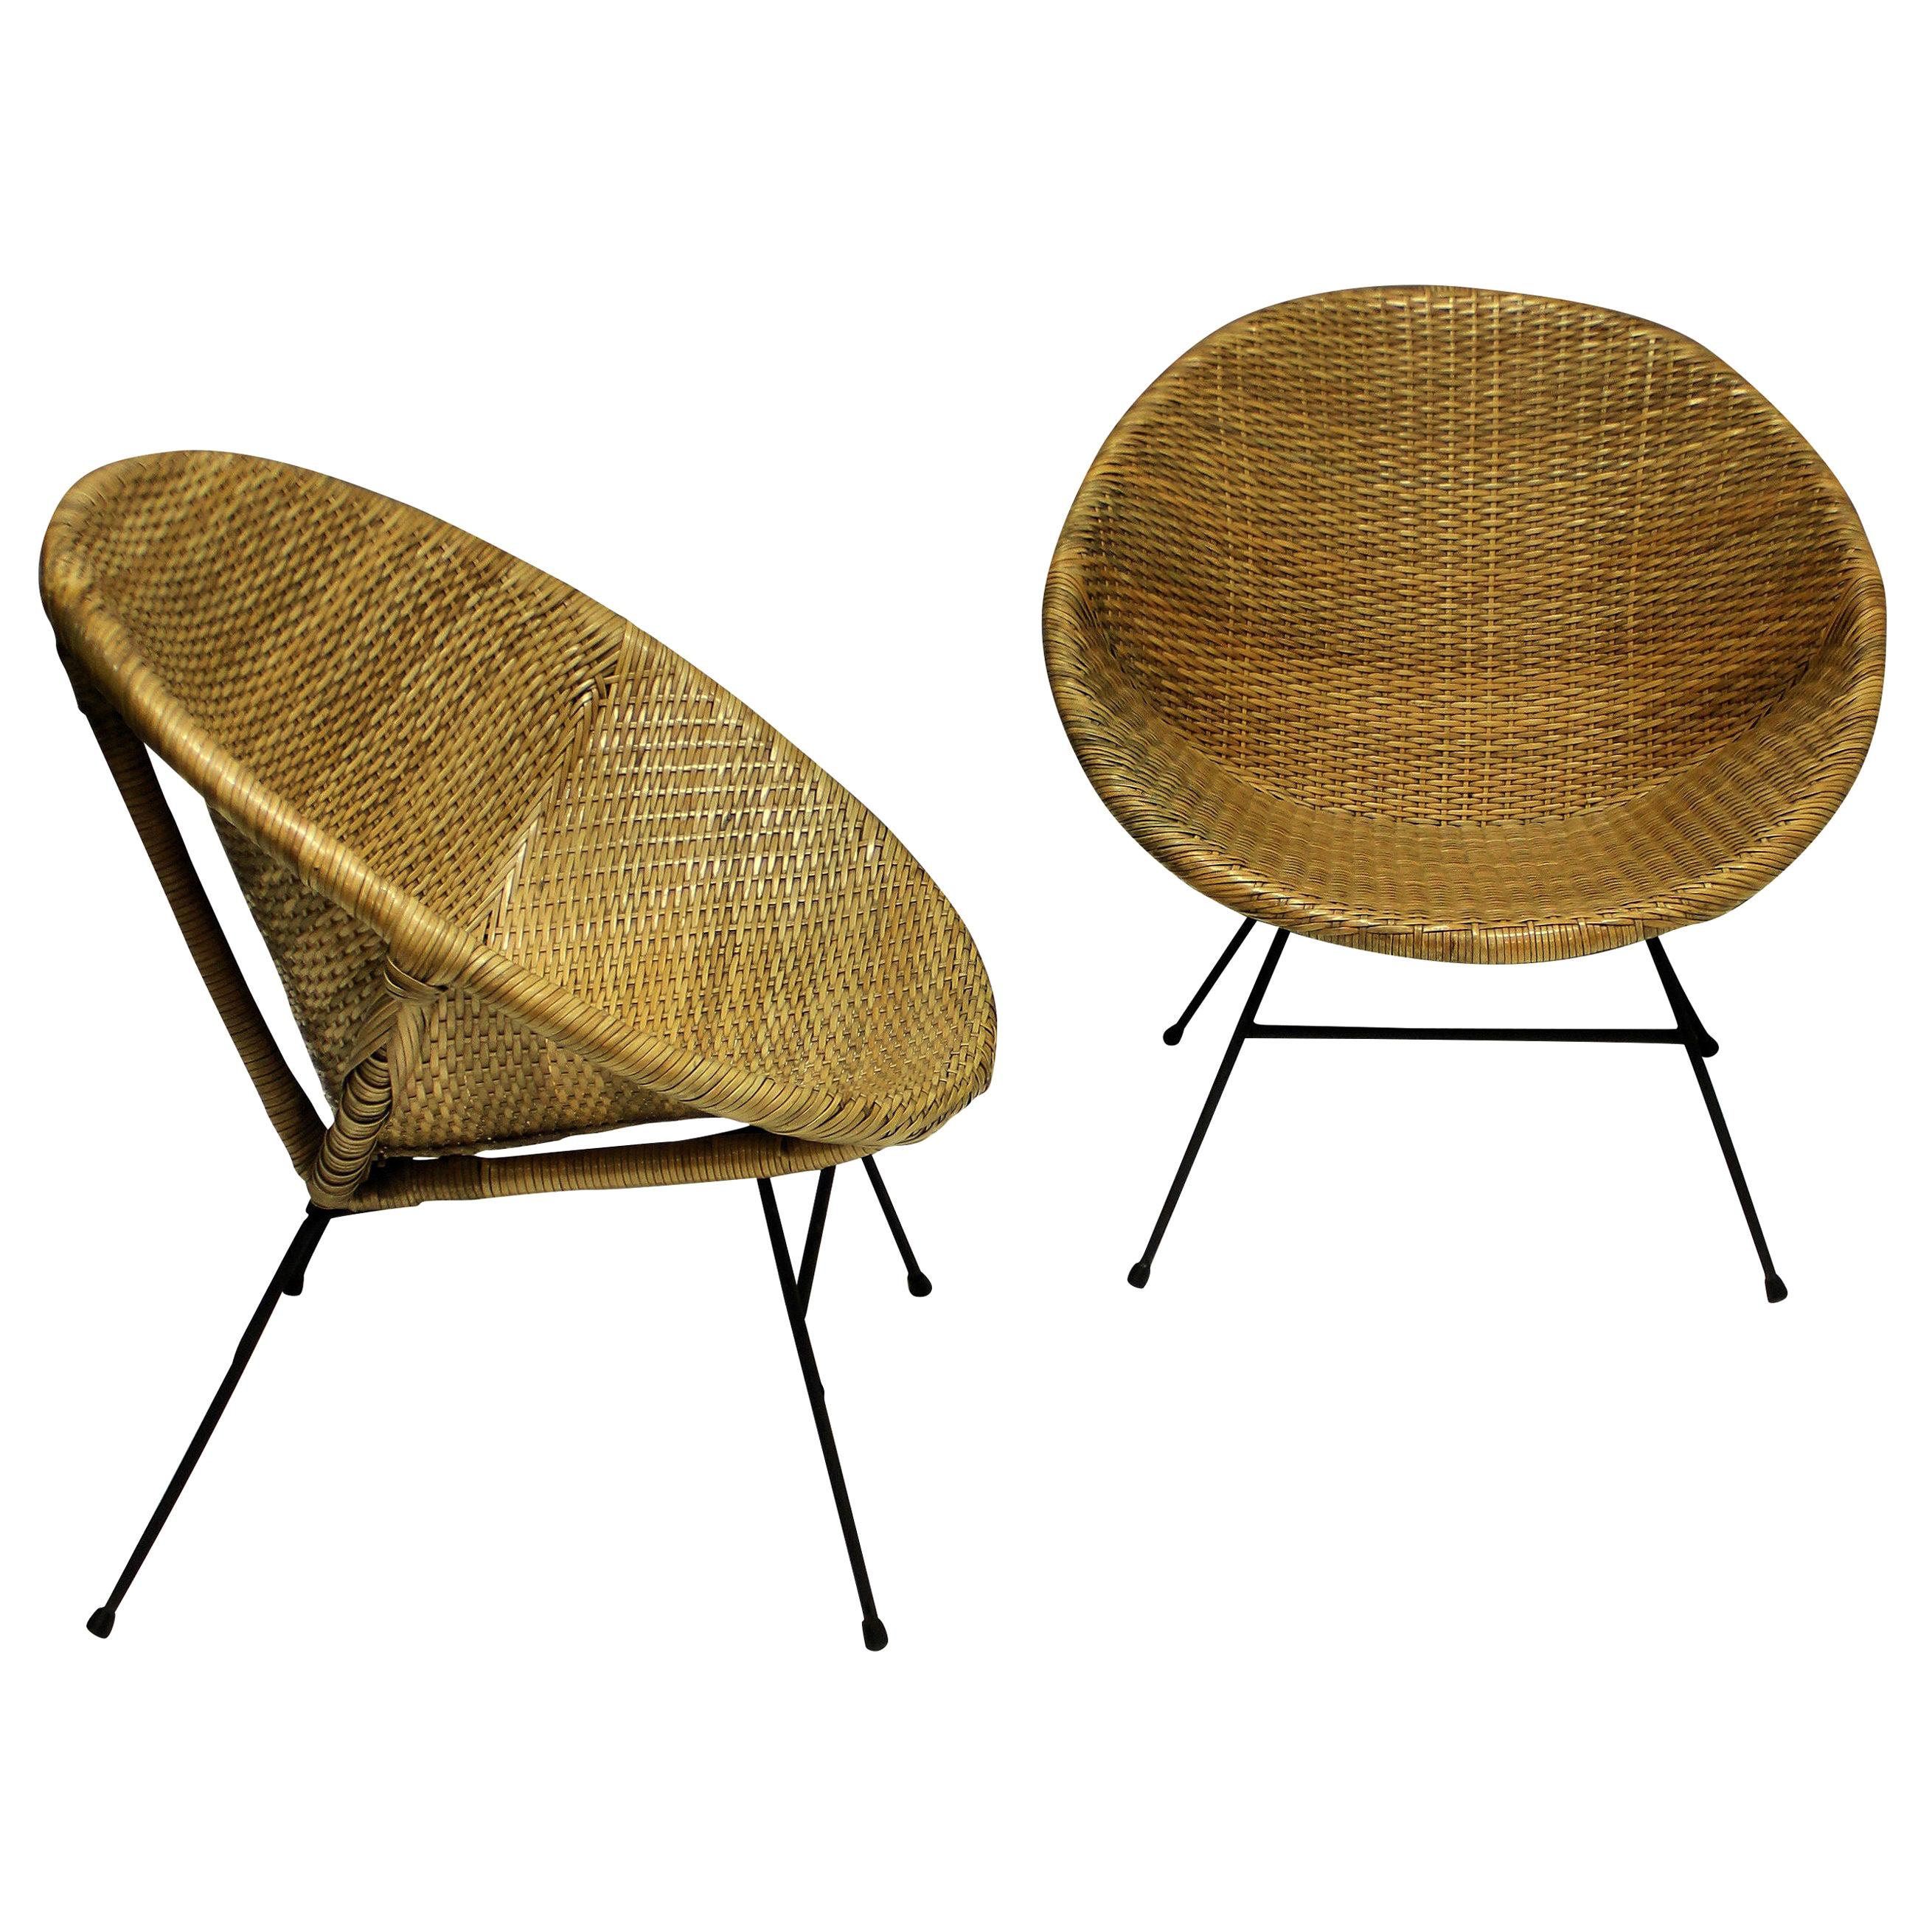 Pair of Unusual French Midcentury Rattan Chairs